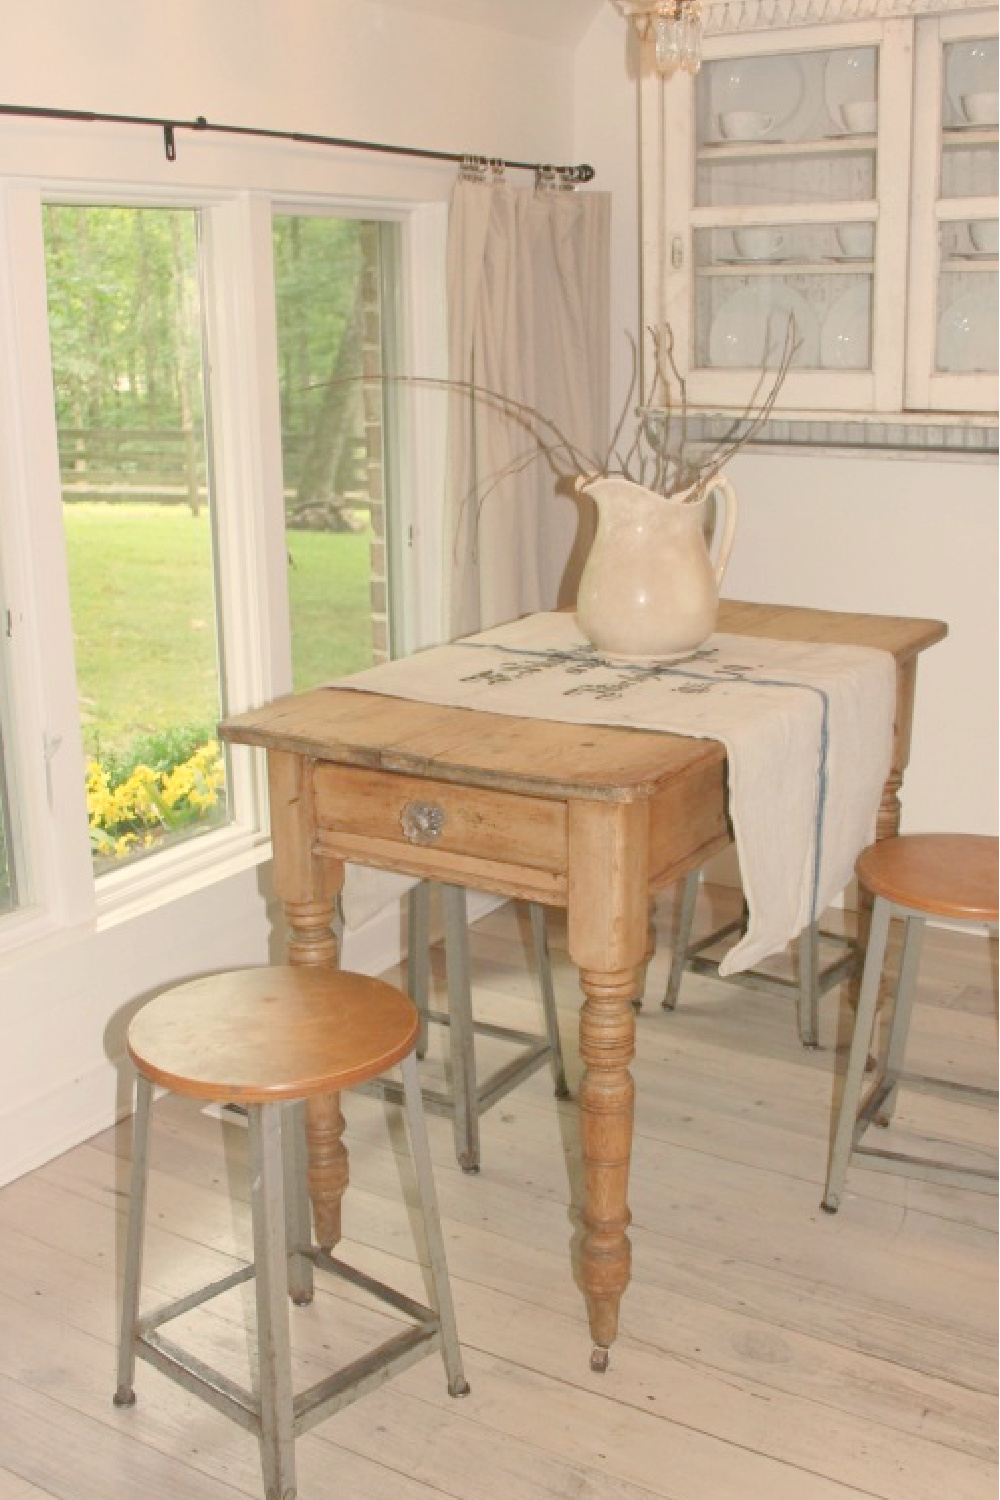 Rustic country cottage in Leiper's Fork, TN known as storybook cottage - Hello Lovely Studio.